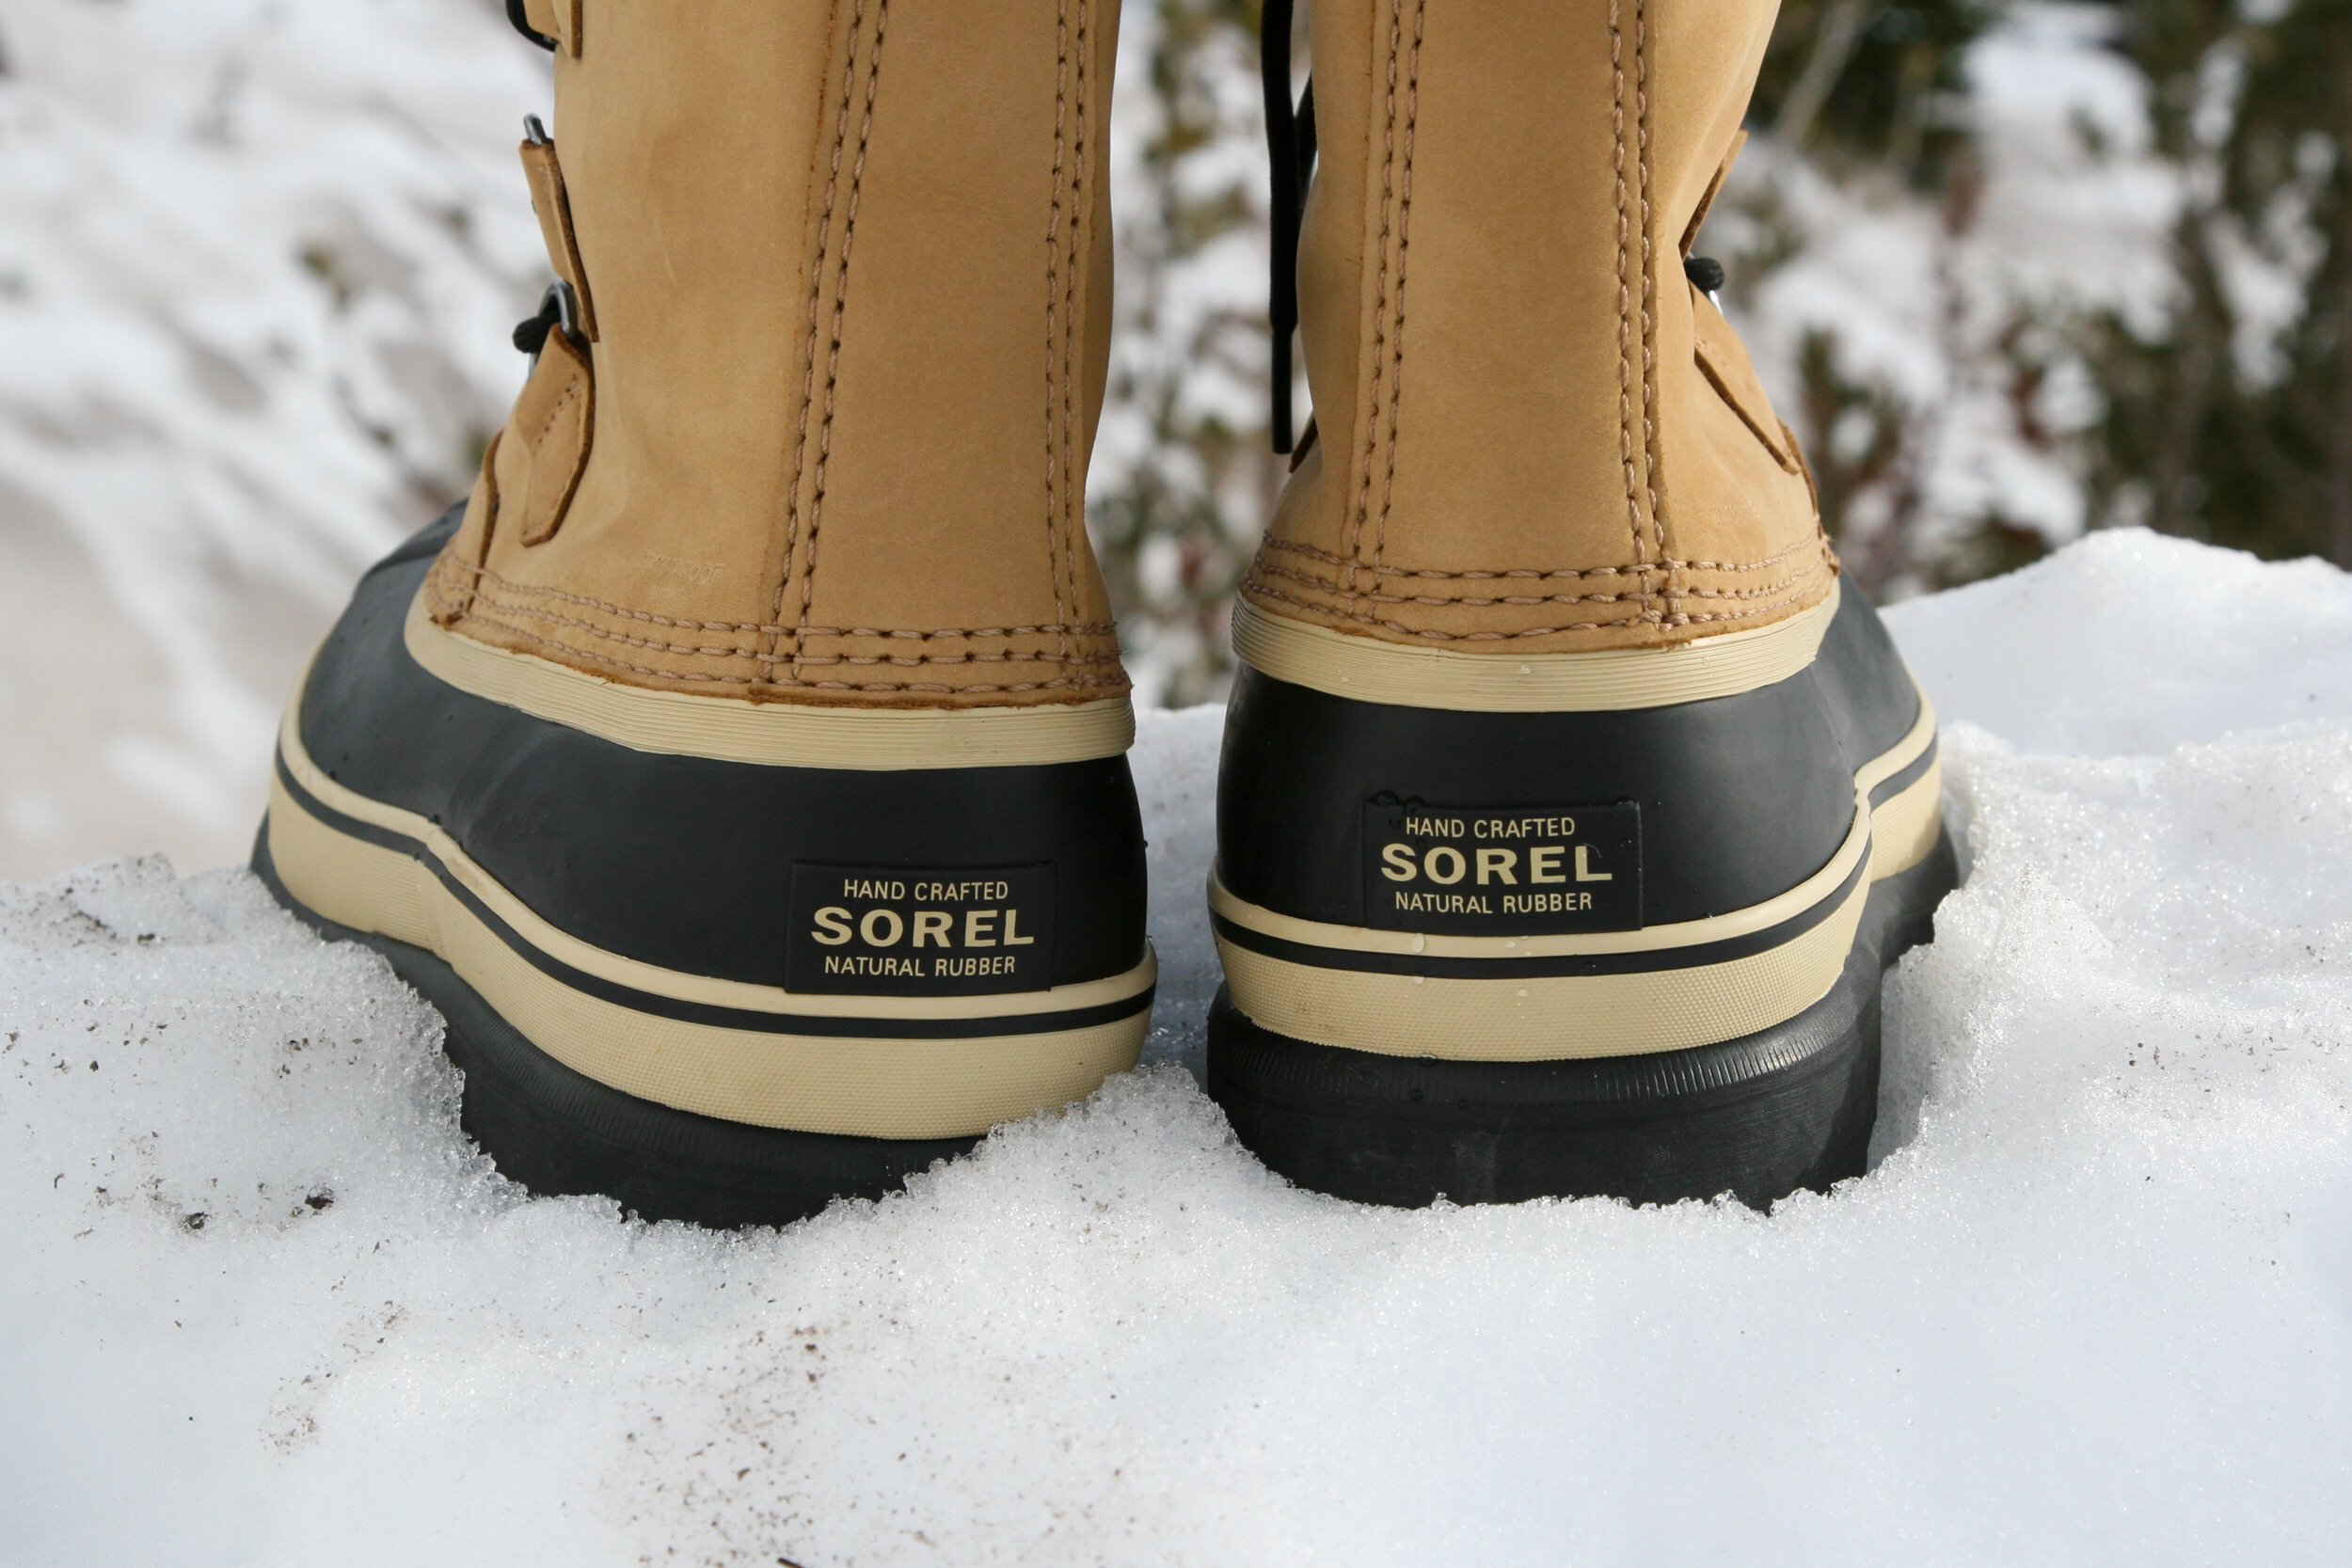 SOREL IS WELL-KNOWN FOR QUALITY - SOREL CARIBOU